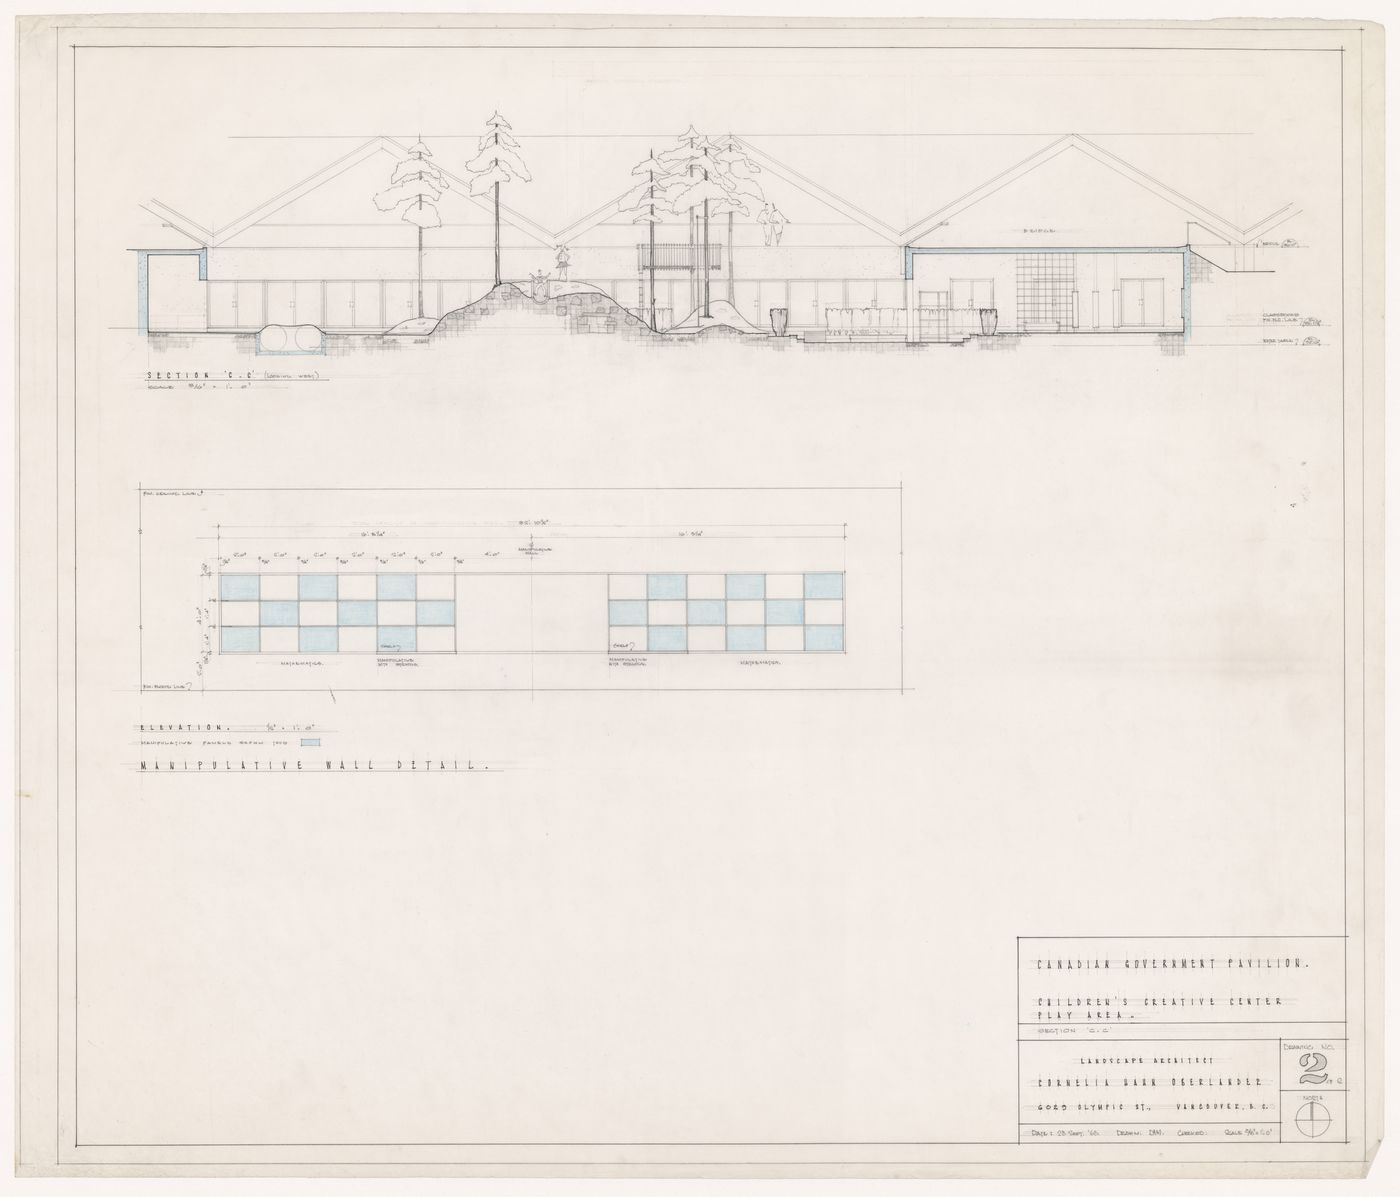 Section and elevation for manipulative wall for Children's Creative Centre Playground, Canadian Federal Pavilion, Expo '67, Montréal, Québec